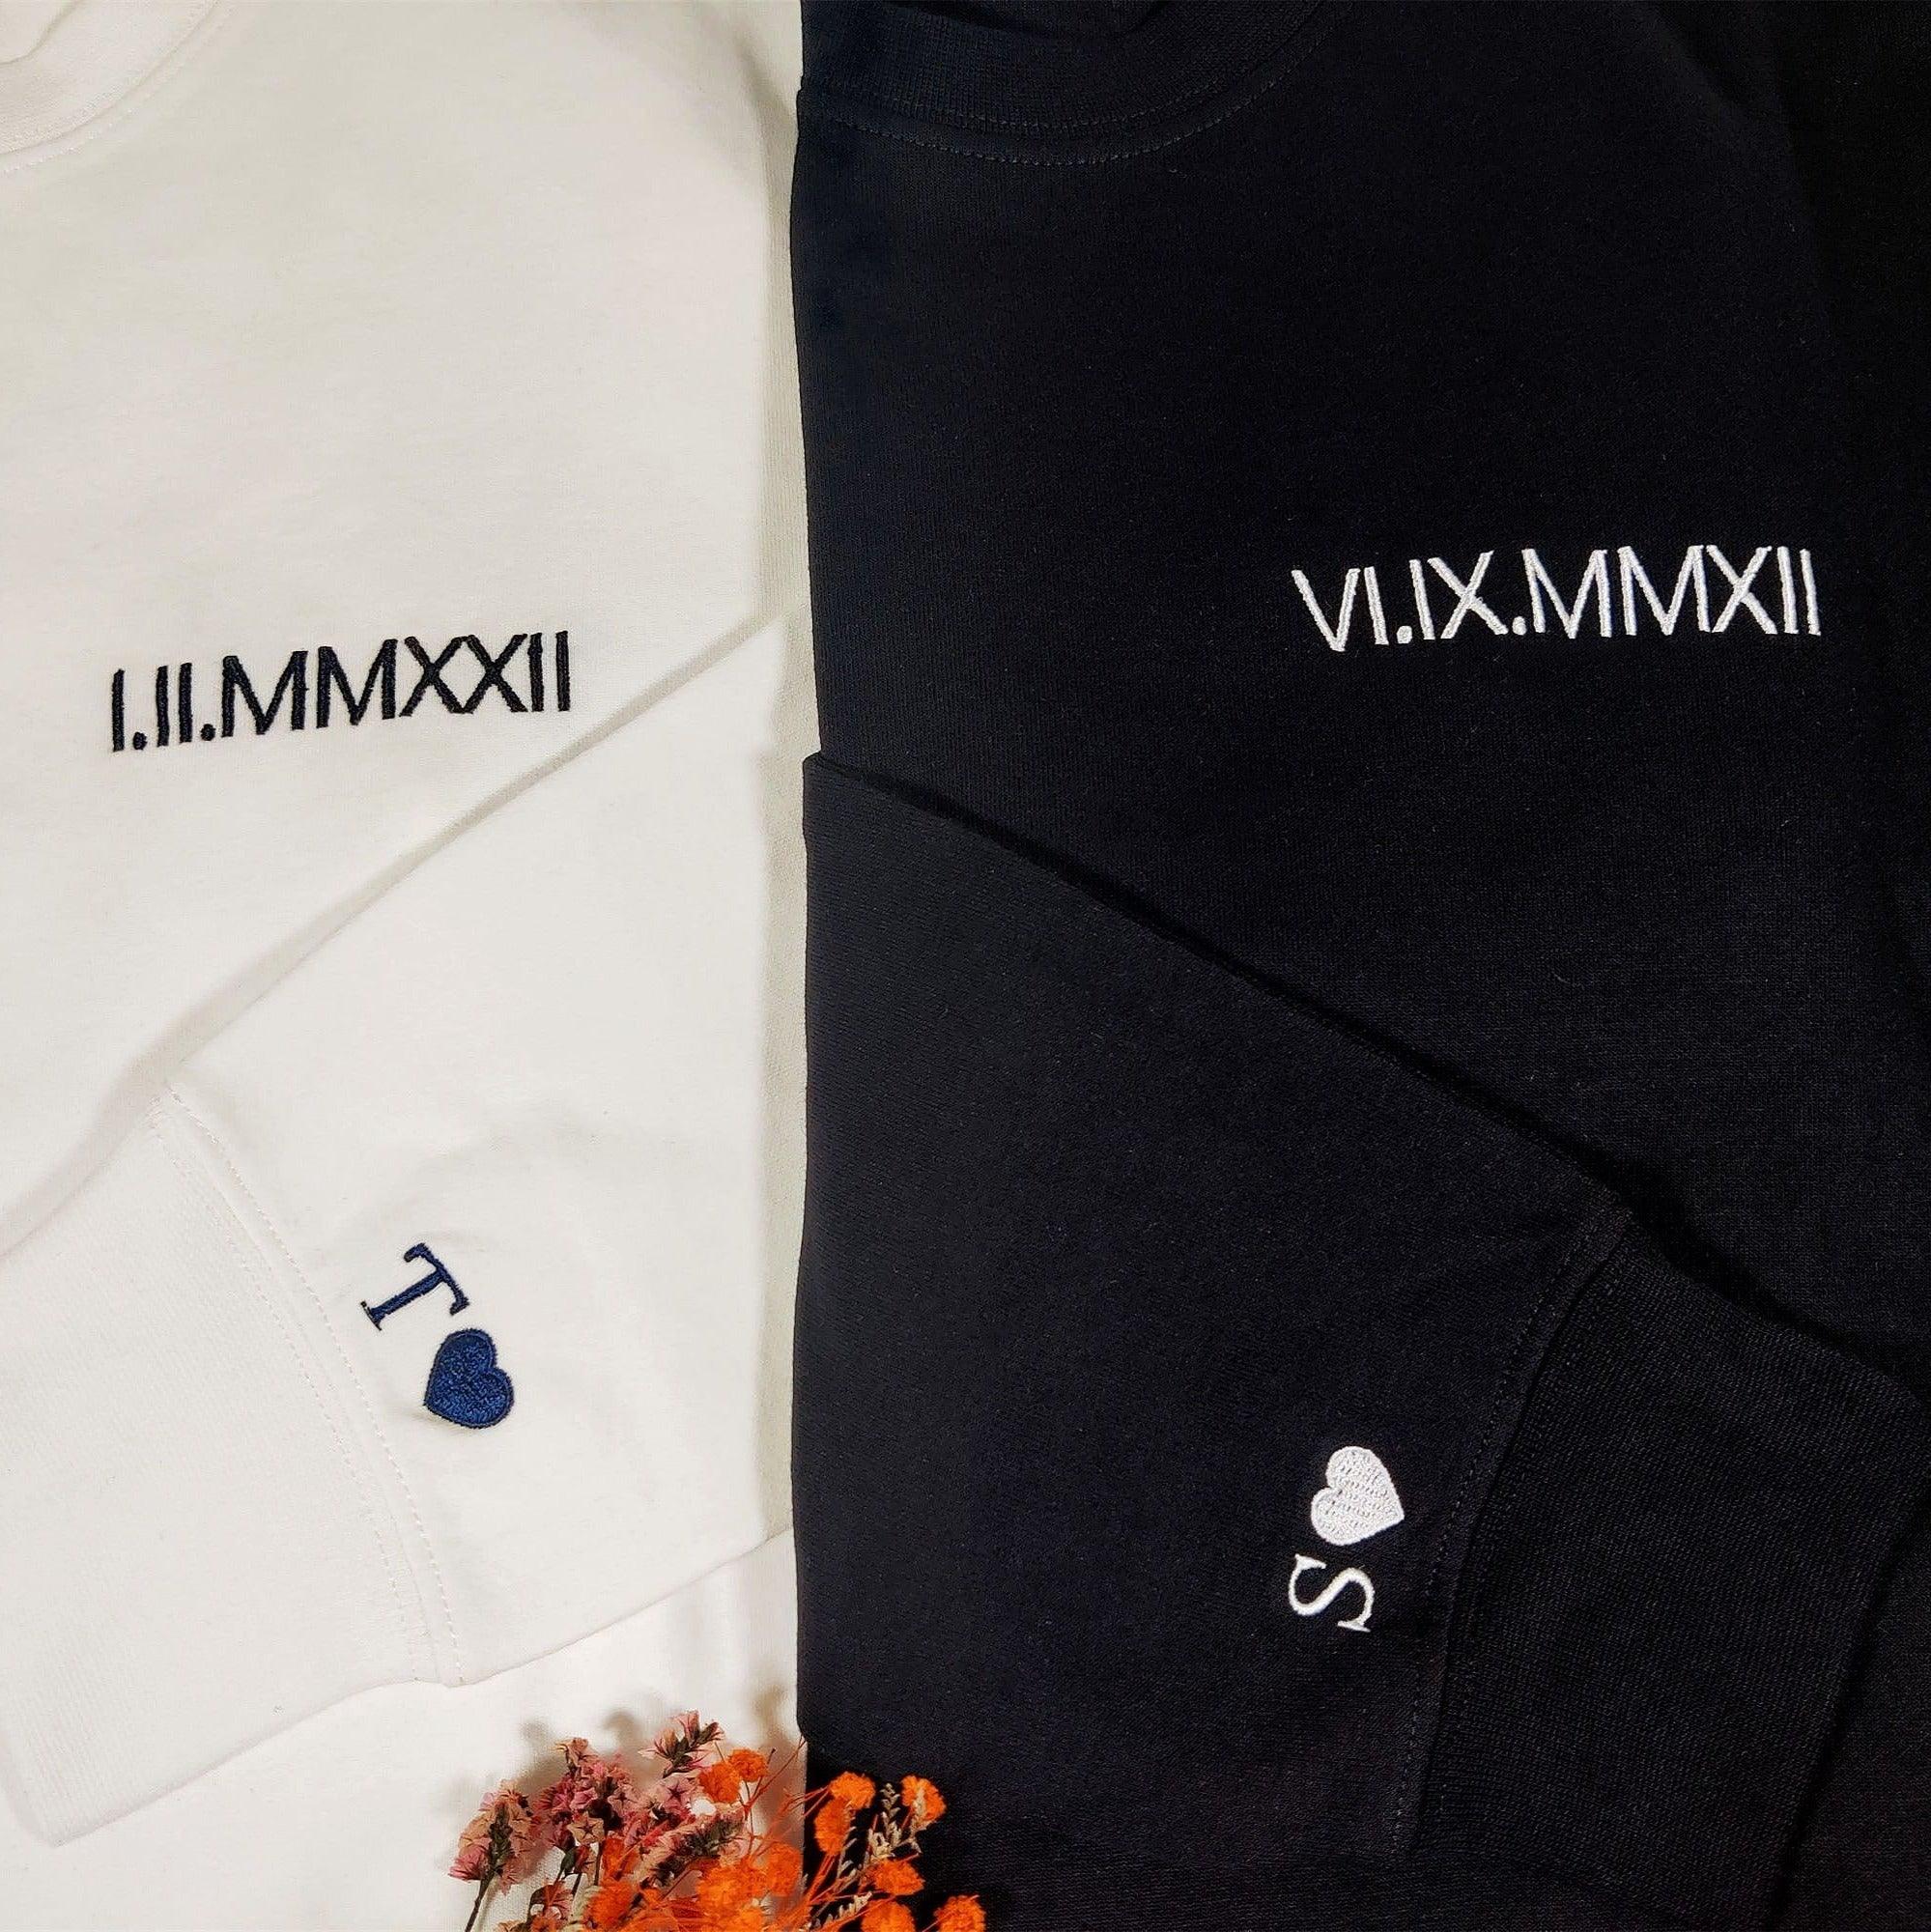 Personalized Embroidered Matching Hoodies with Roman Numerals Date Text and Initials on Sleeve